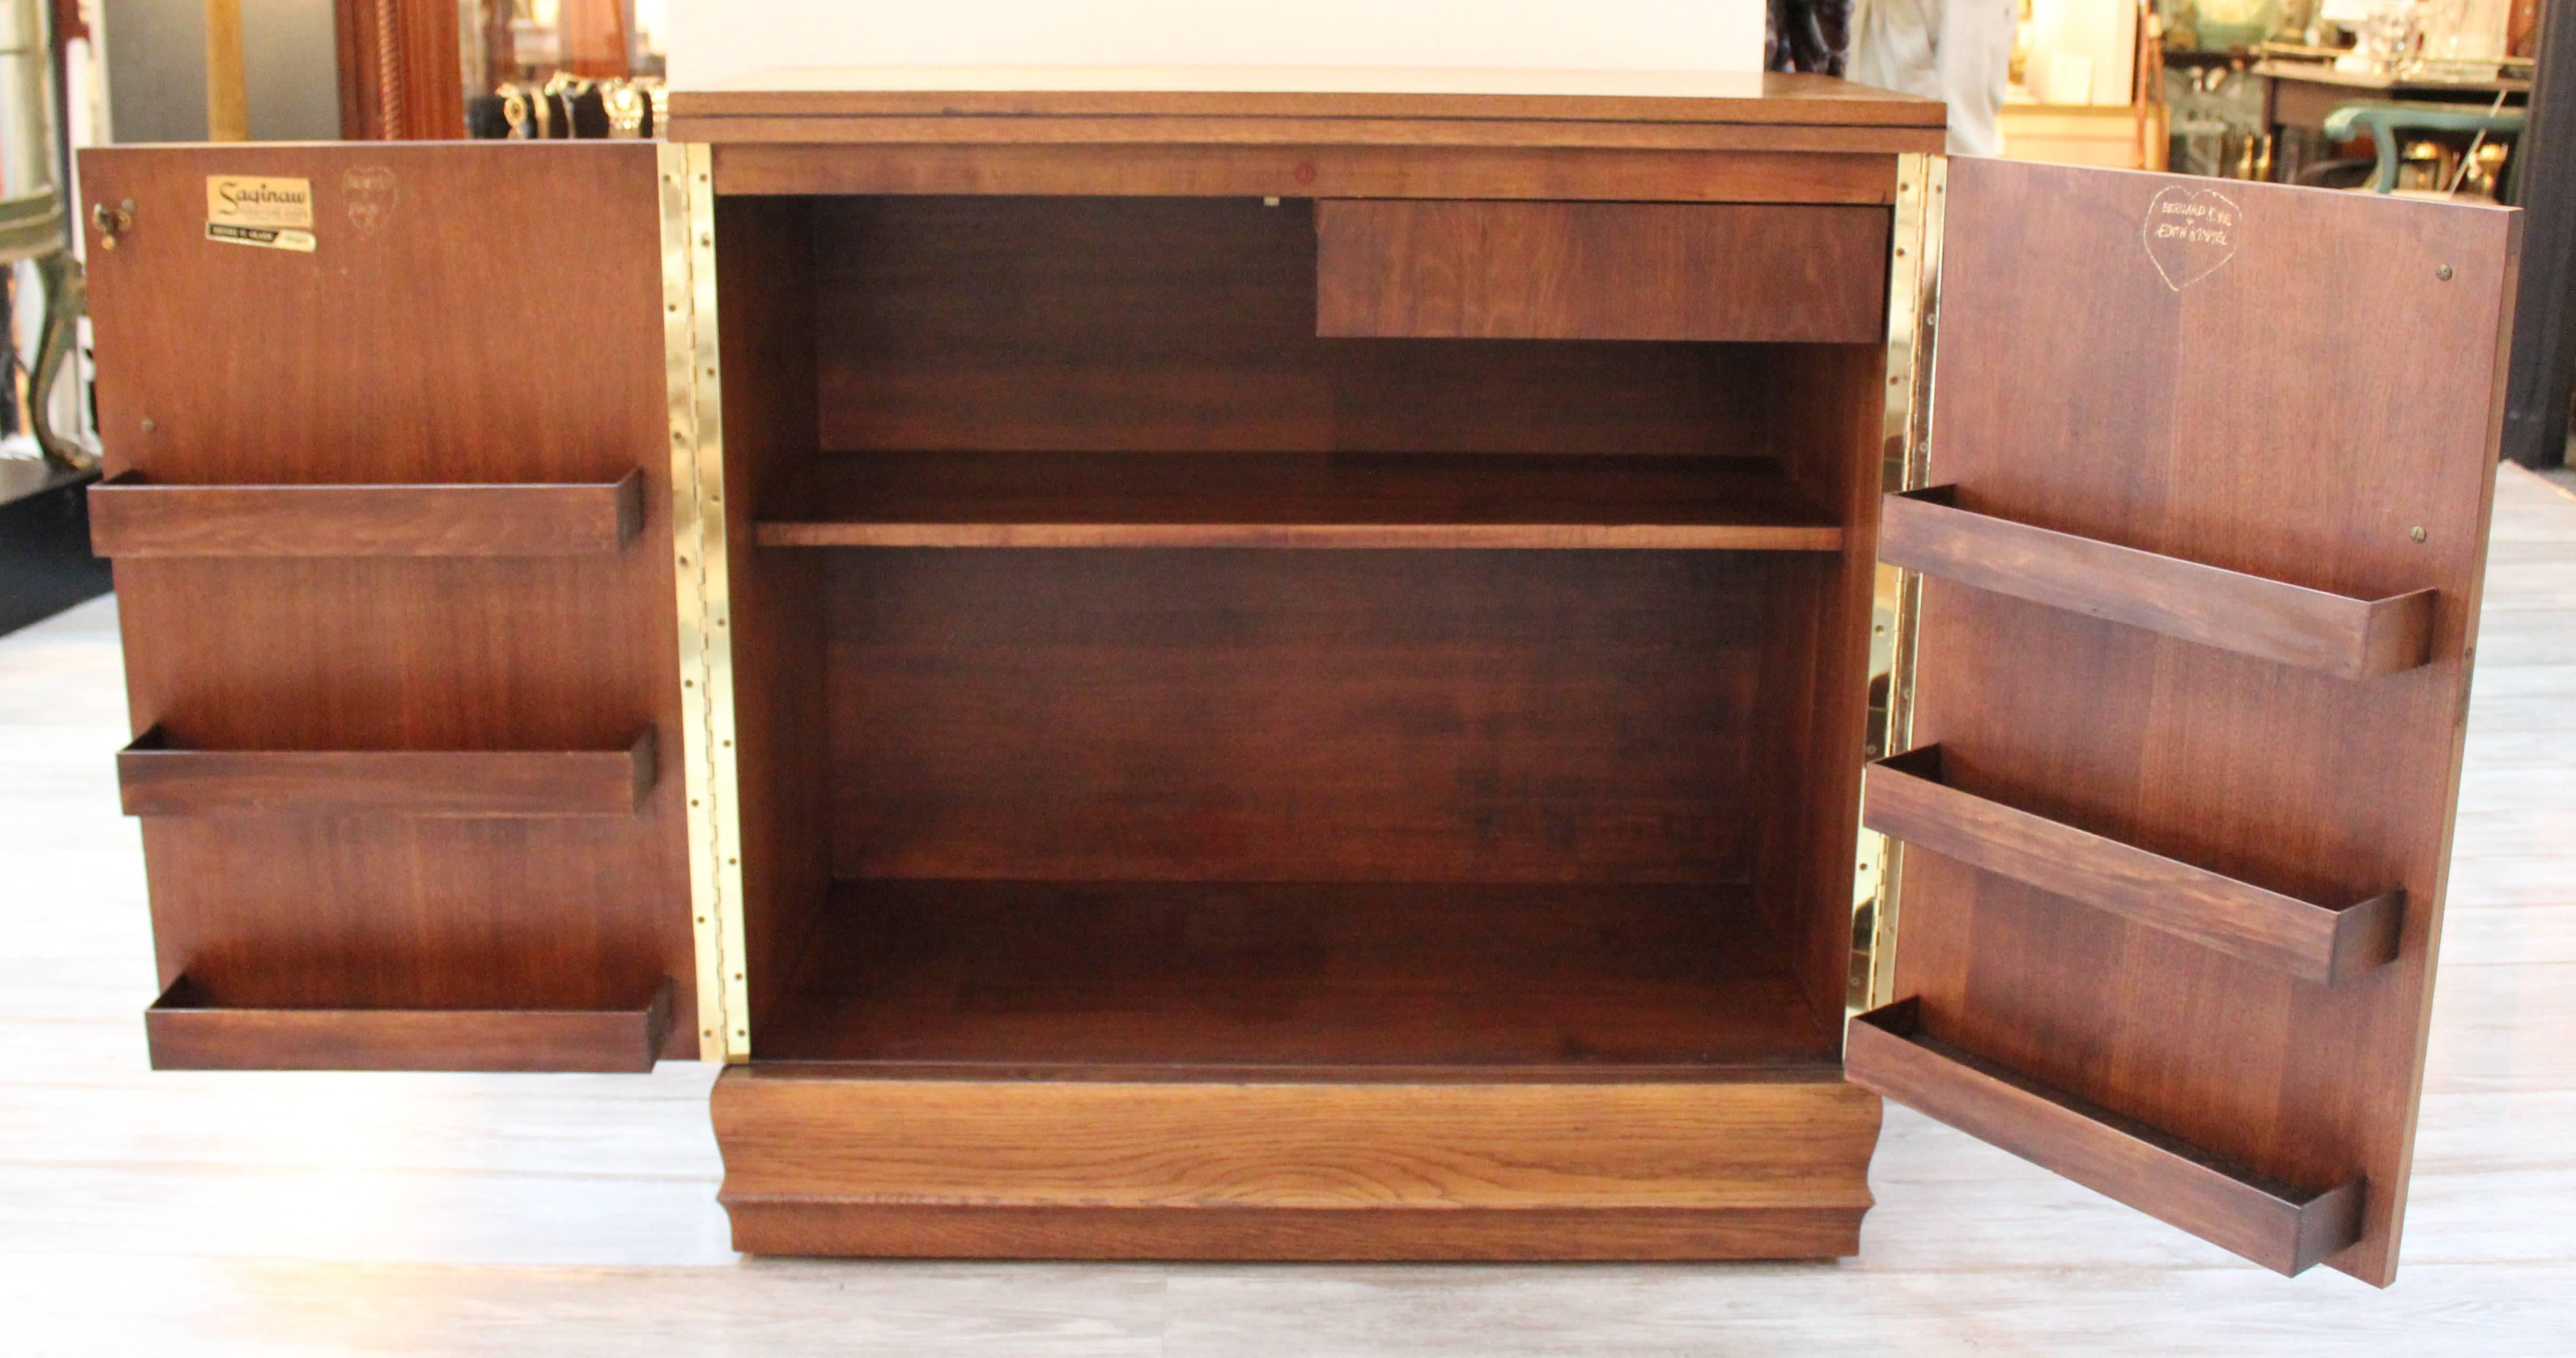 Medium stain mahogany flip-top bar with back formica top (when opened).
Two doors reveal shelving and storage for a well stock bar. Marked 